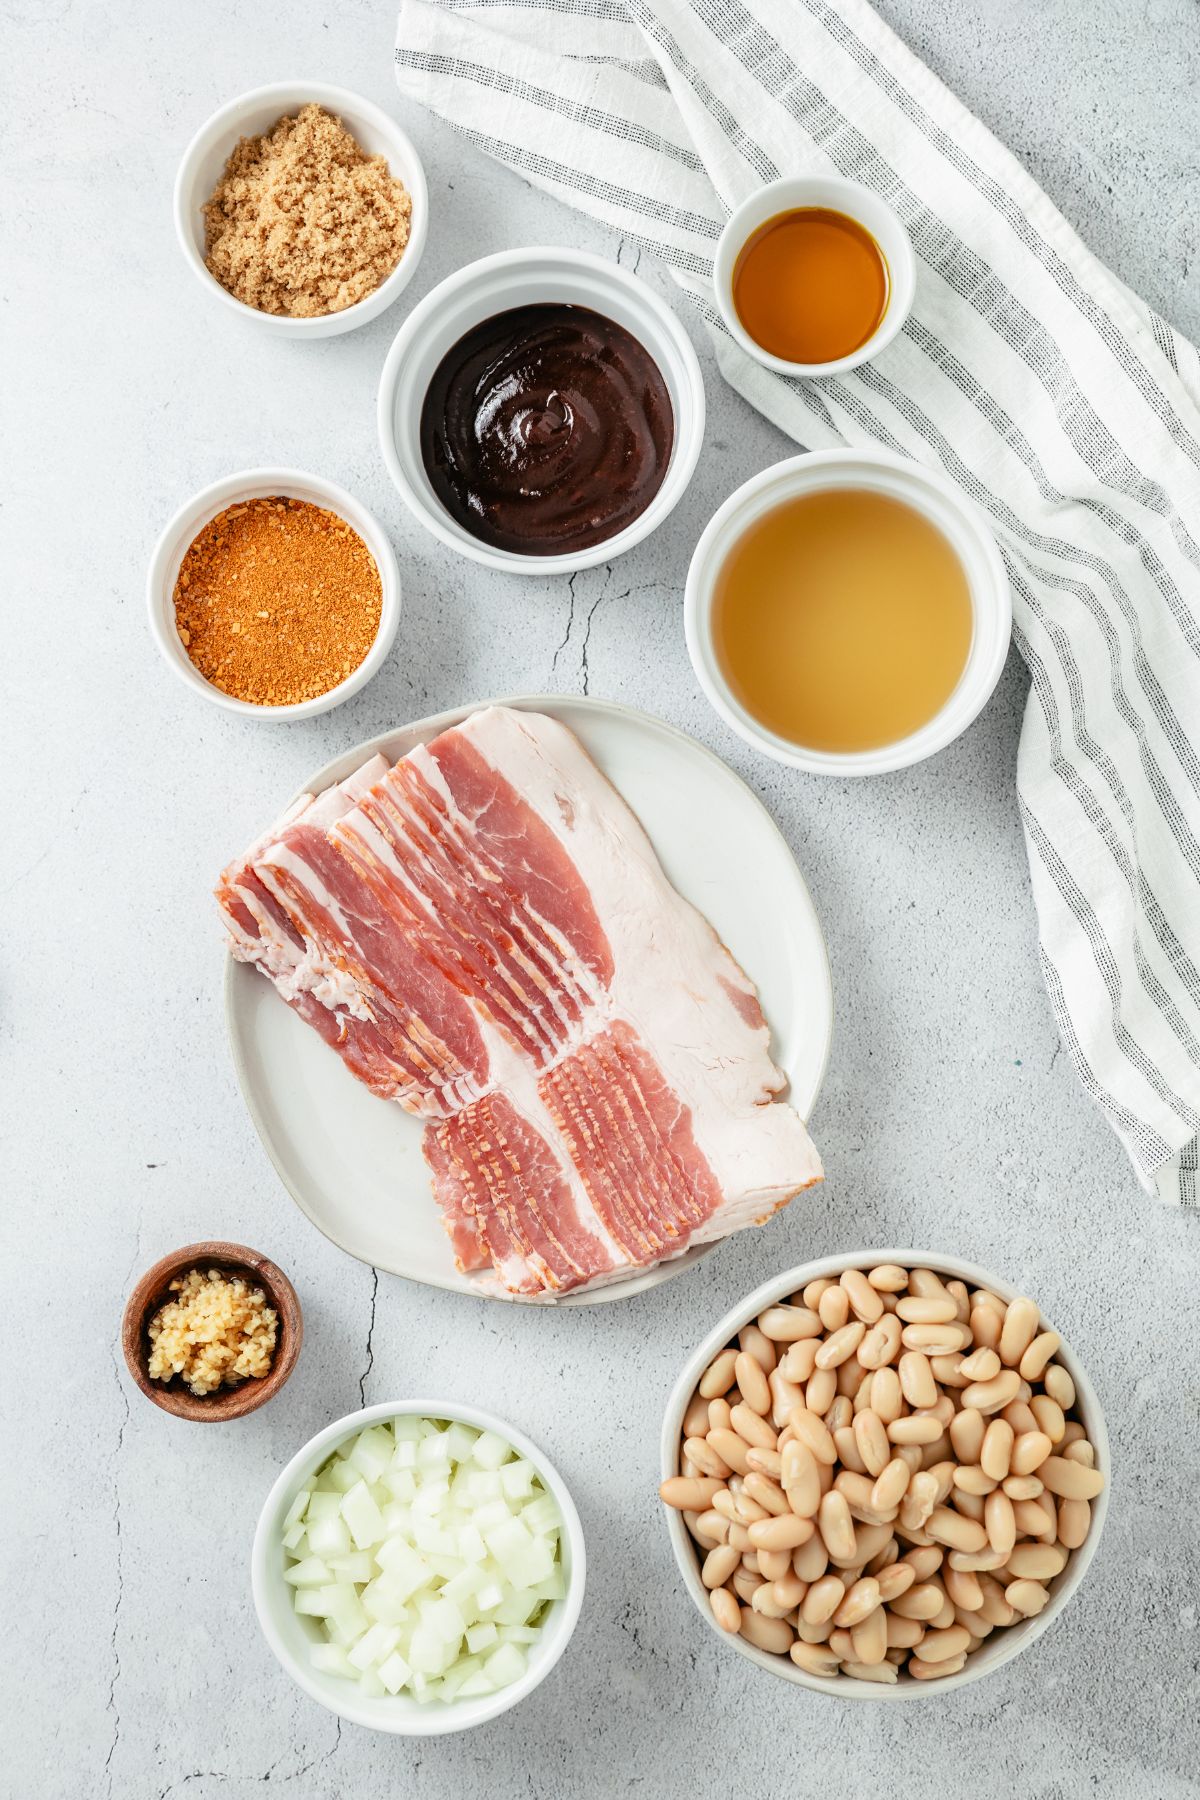 Ingredients for Baked Beans With Canned Beans: No sugar-added bacon, yellow onion, minced garlic, low-sodium chicken broth, cannellini beans, BBQ seasoning, hickory or Kansas City style BBQ sauce, brown sugar, and a touch of Hennessy for a flavorful twist.